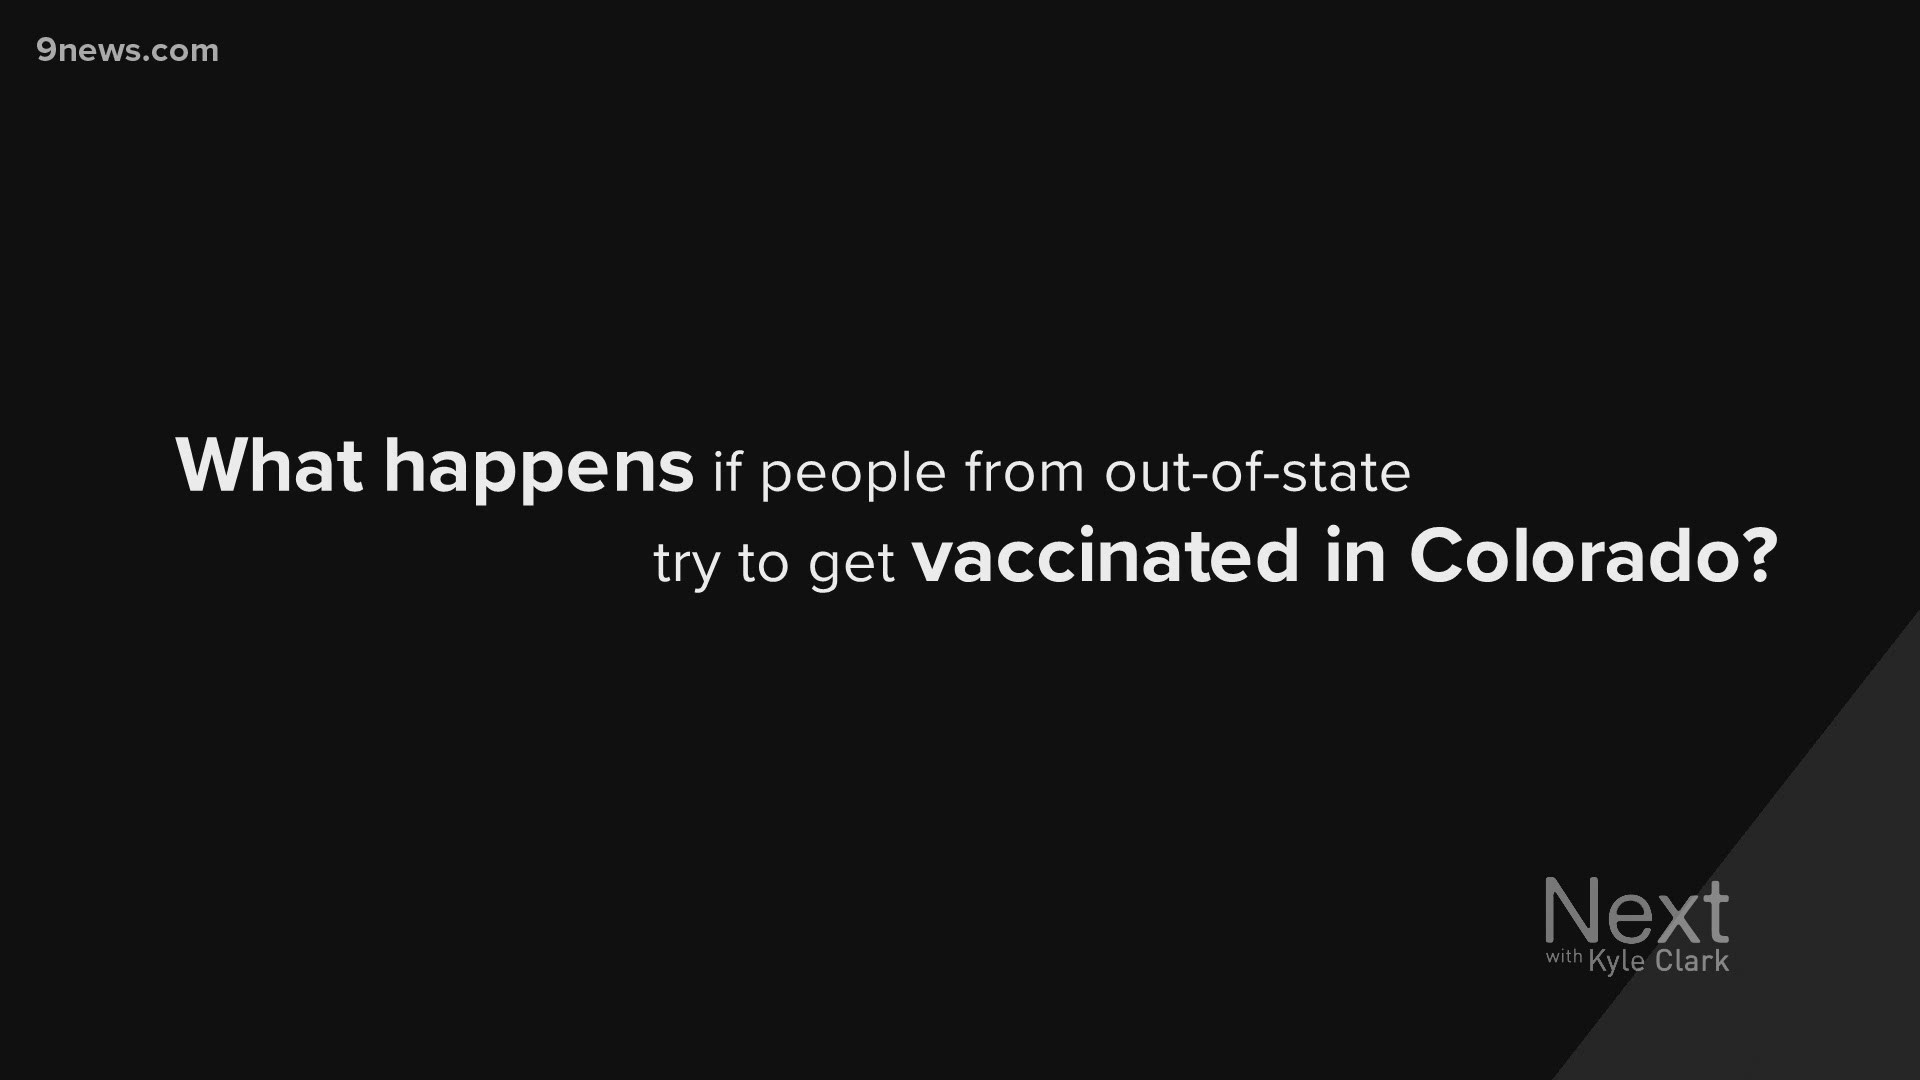 We answer more of your COVID vaccine questions, from confusion about hospital employees to people from out-of-state.